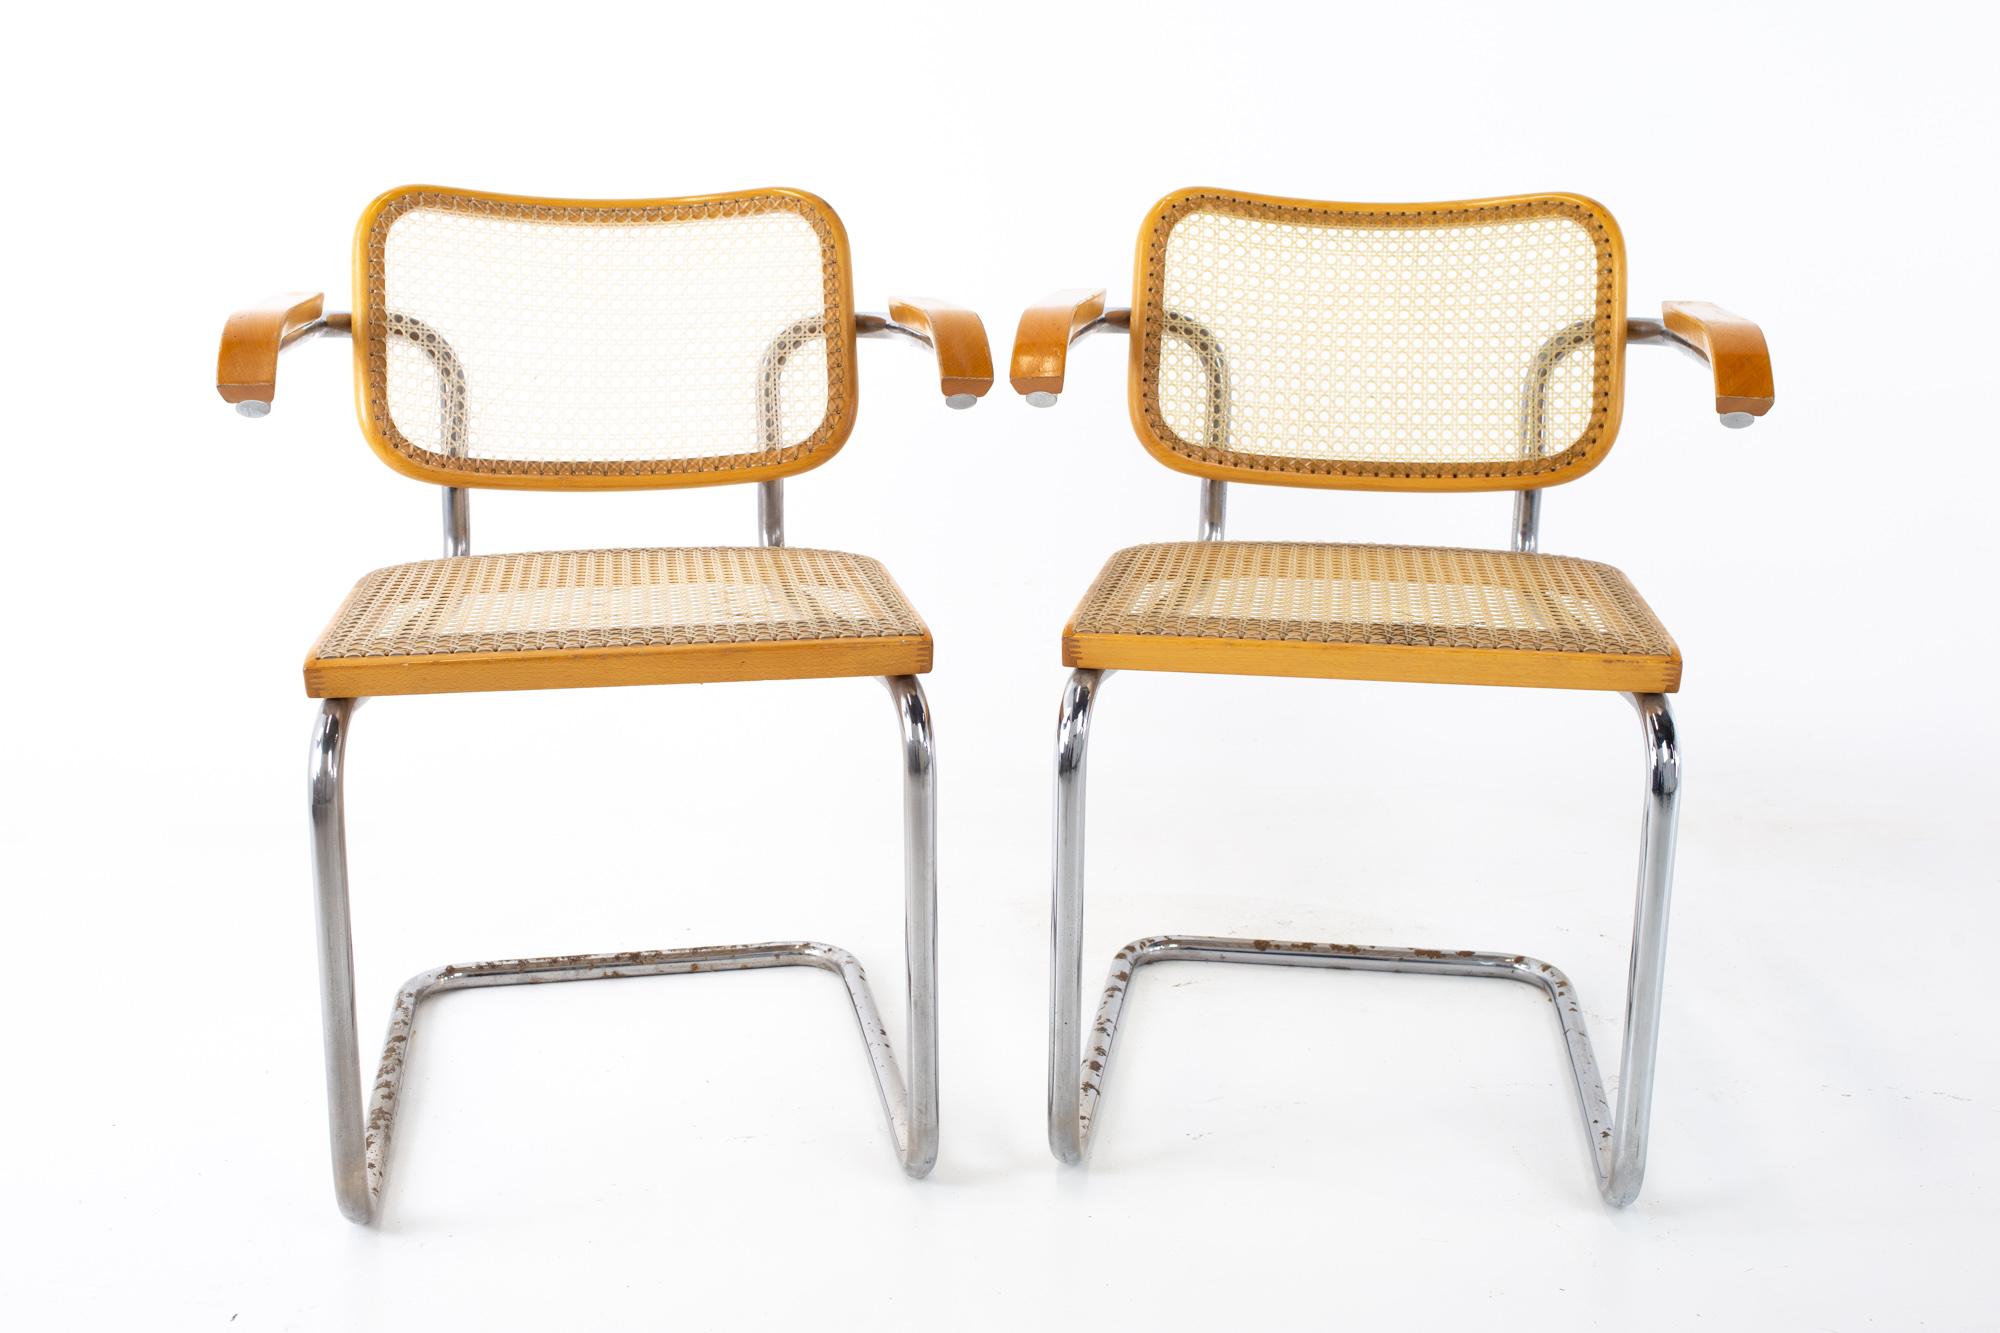 Marcel Breuer for Stendig B64 style Mid Century chrome and cane dining chair - pair
Each chair measures: 23 wide x 22 deep x 30 high, with a seat height of 18 inches

All pieces of furniture can be had in what we call restored vintage condition.